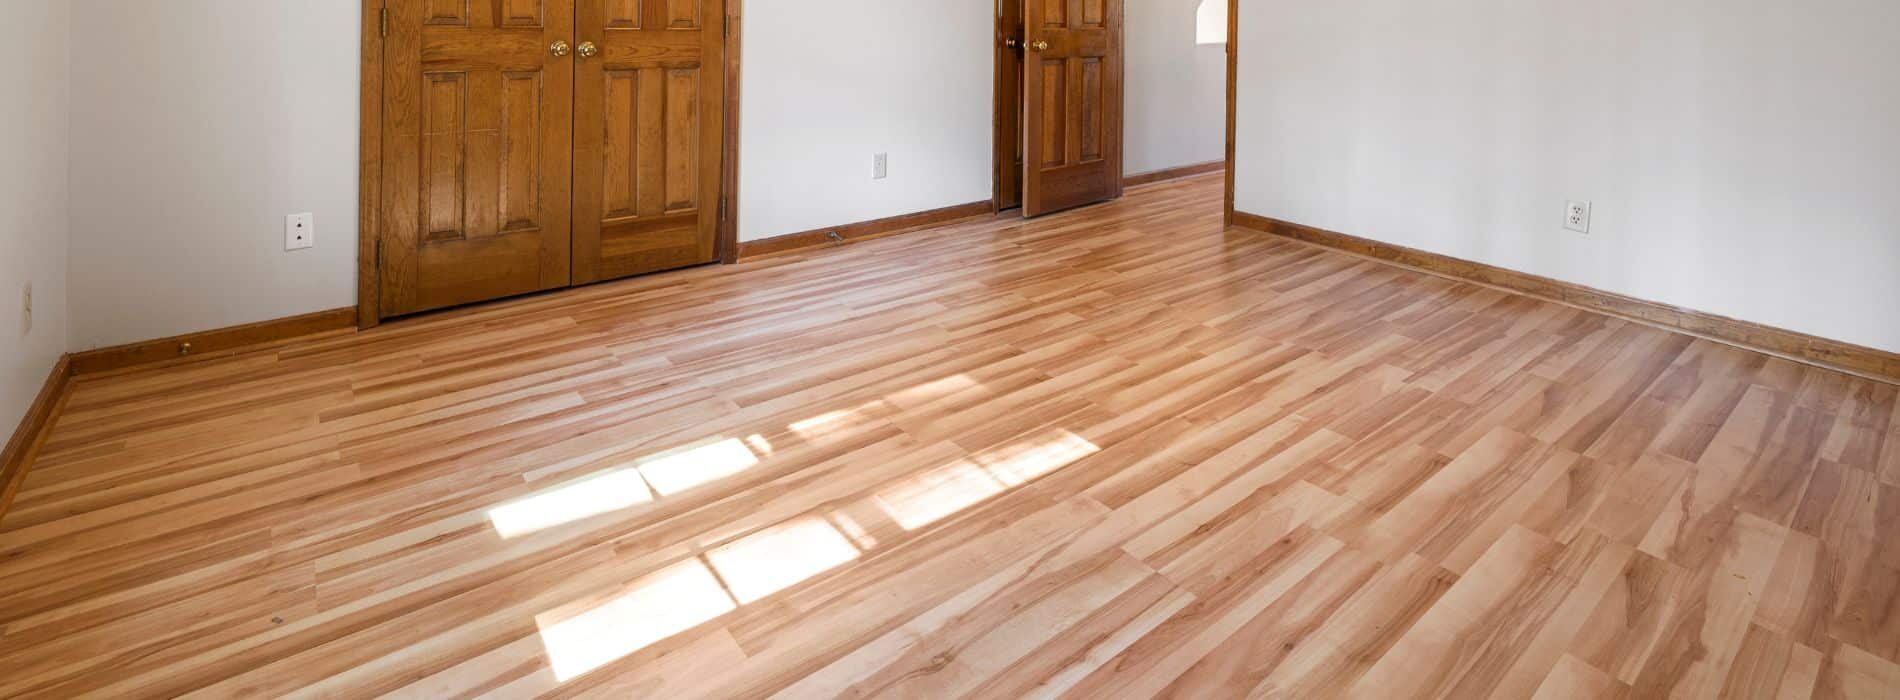 Expertly restored 5 year old hardwood floor in Benfleet, SS7. Mr Sander® used Bona 2K Frost whitewashing and Traffic HD 15% sheen matte lacquer. Durable and stunning, this finish guarantees long-lasting beauty.